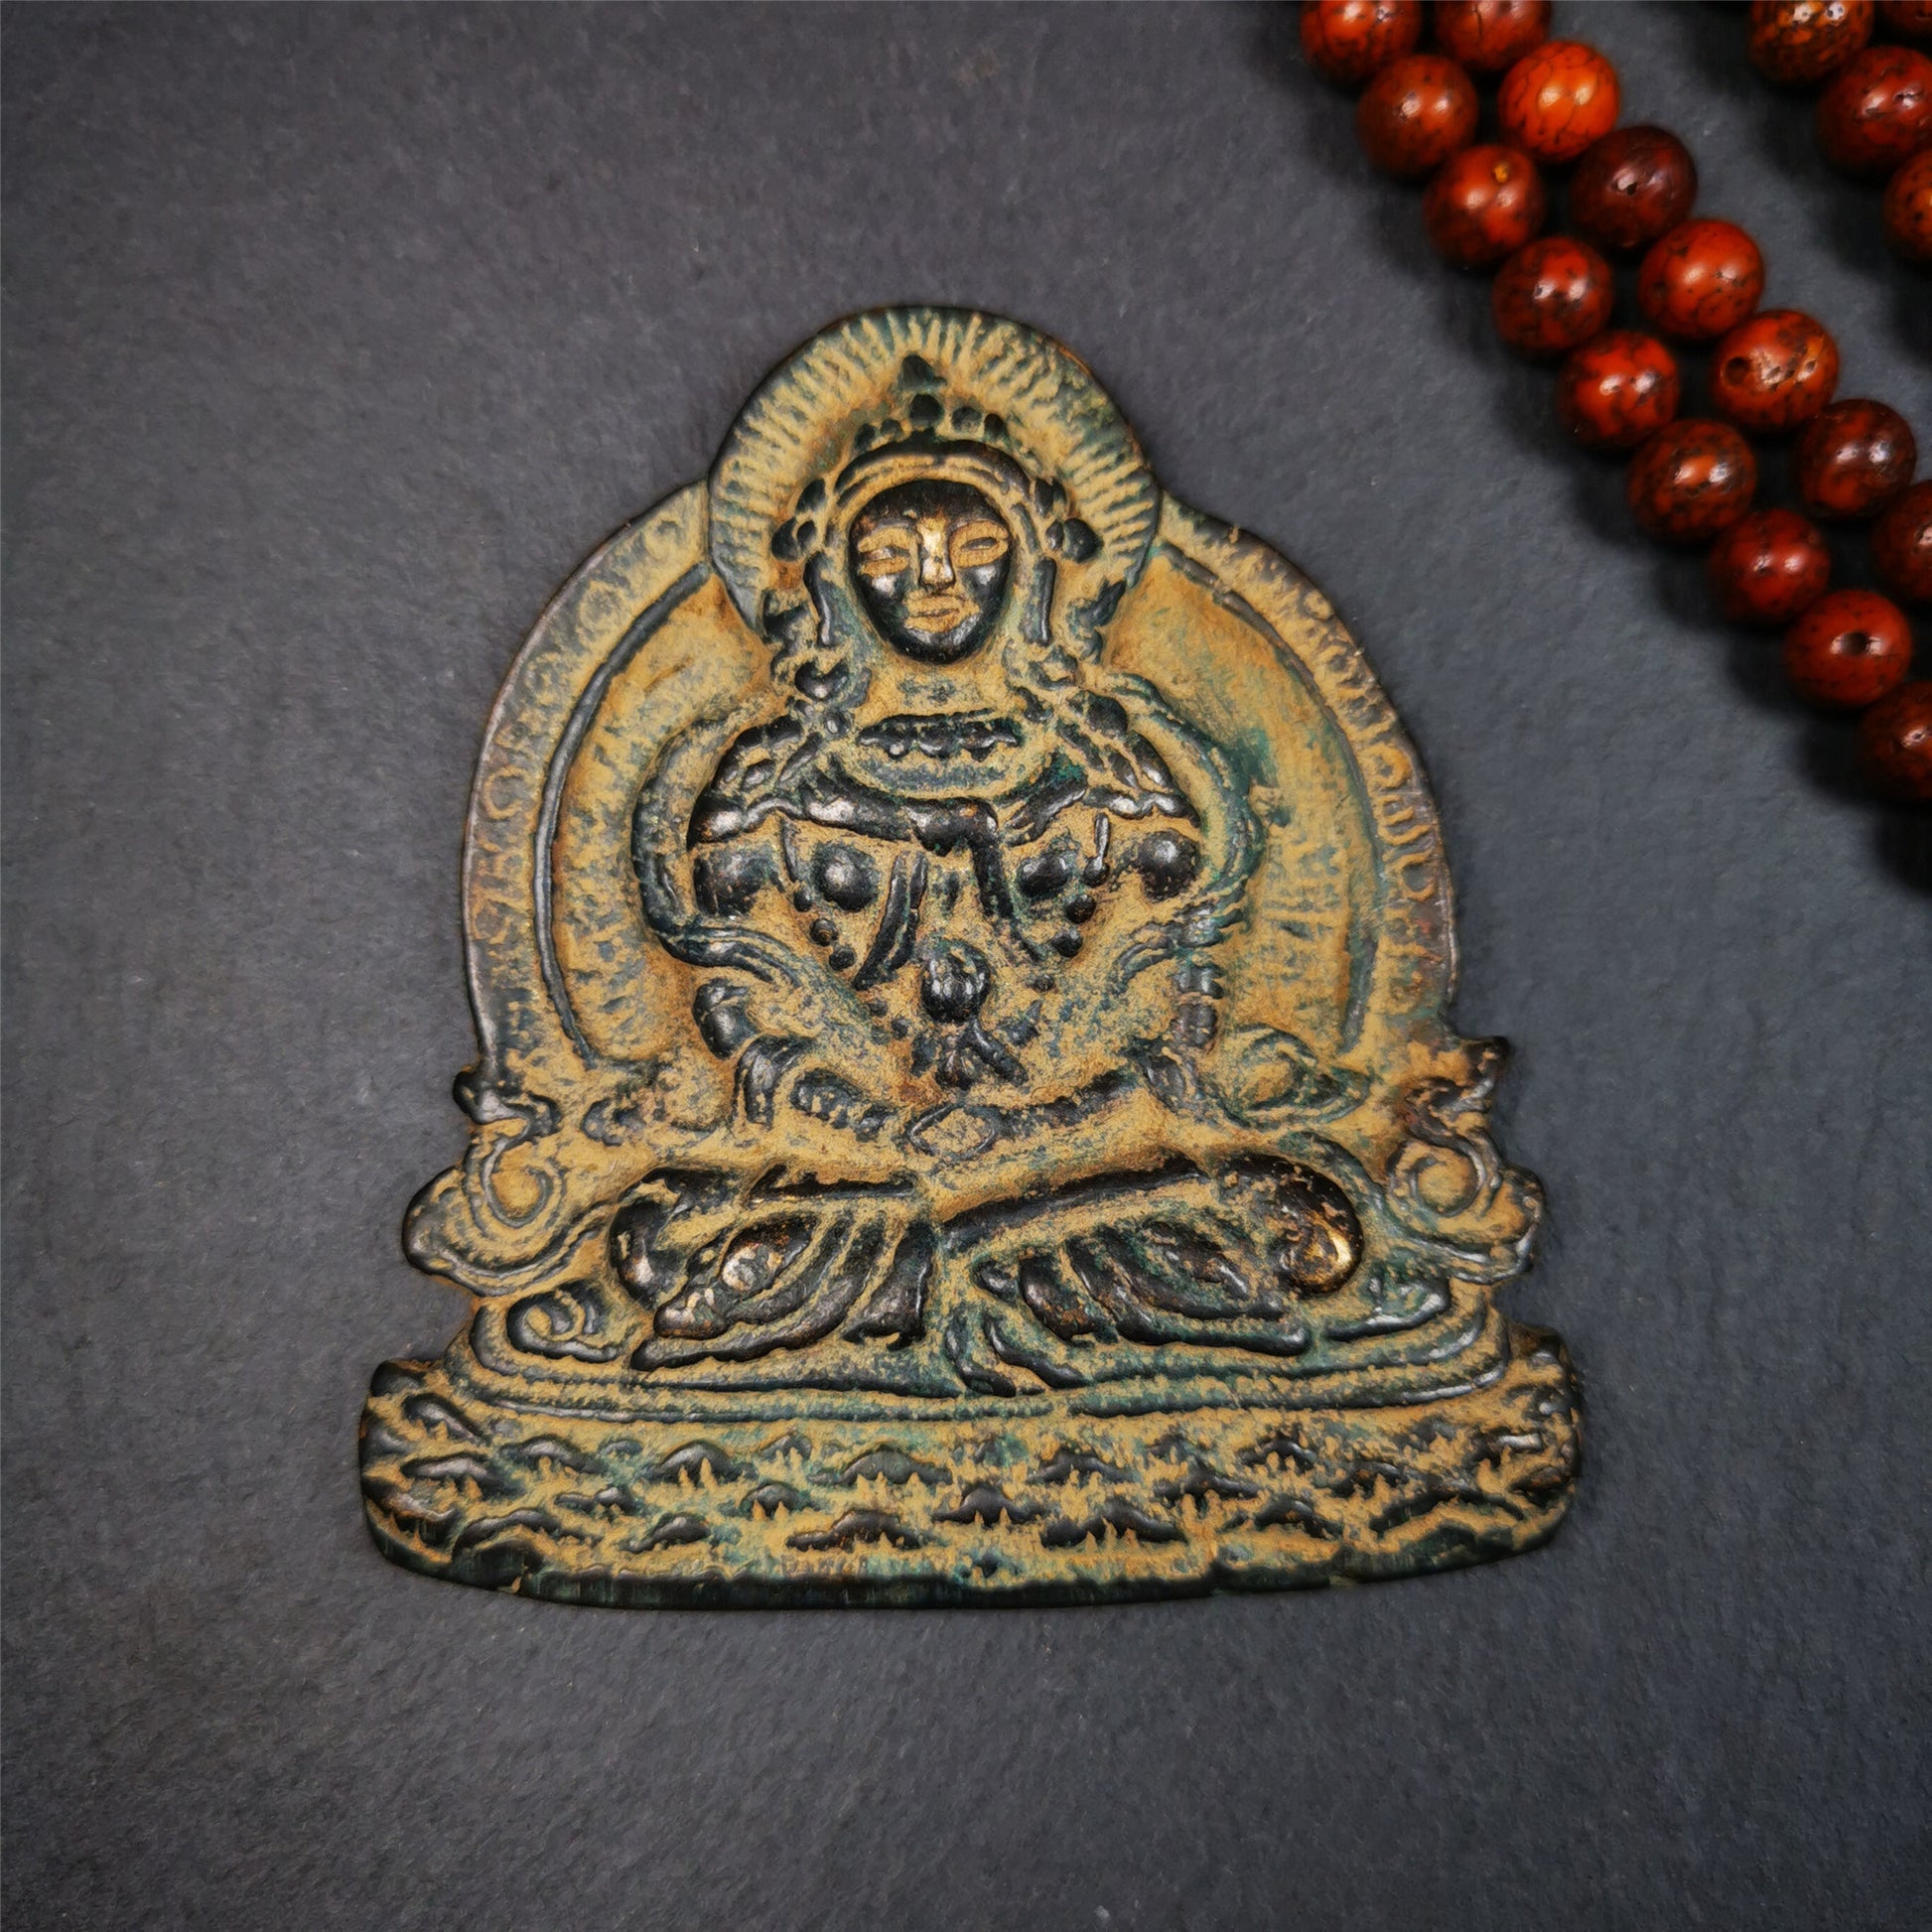 This old amitayus statue was collected from gerze, Tibet. It is made of bronze, size is 3.1 inches . You can make it as a amulet pendant, or put it into your shrine.